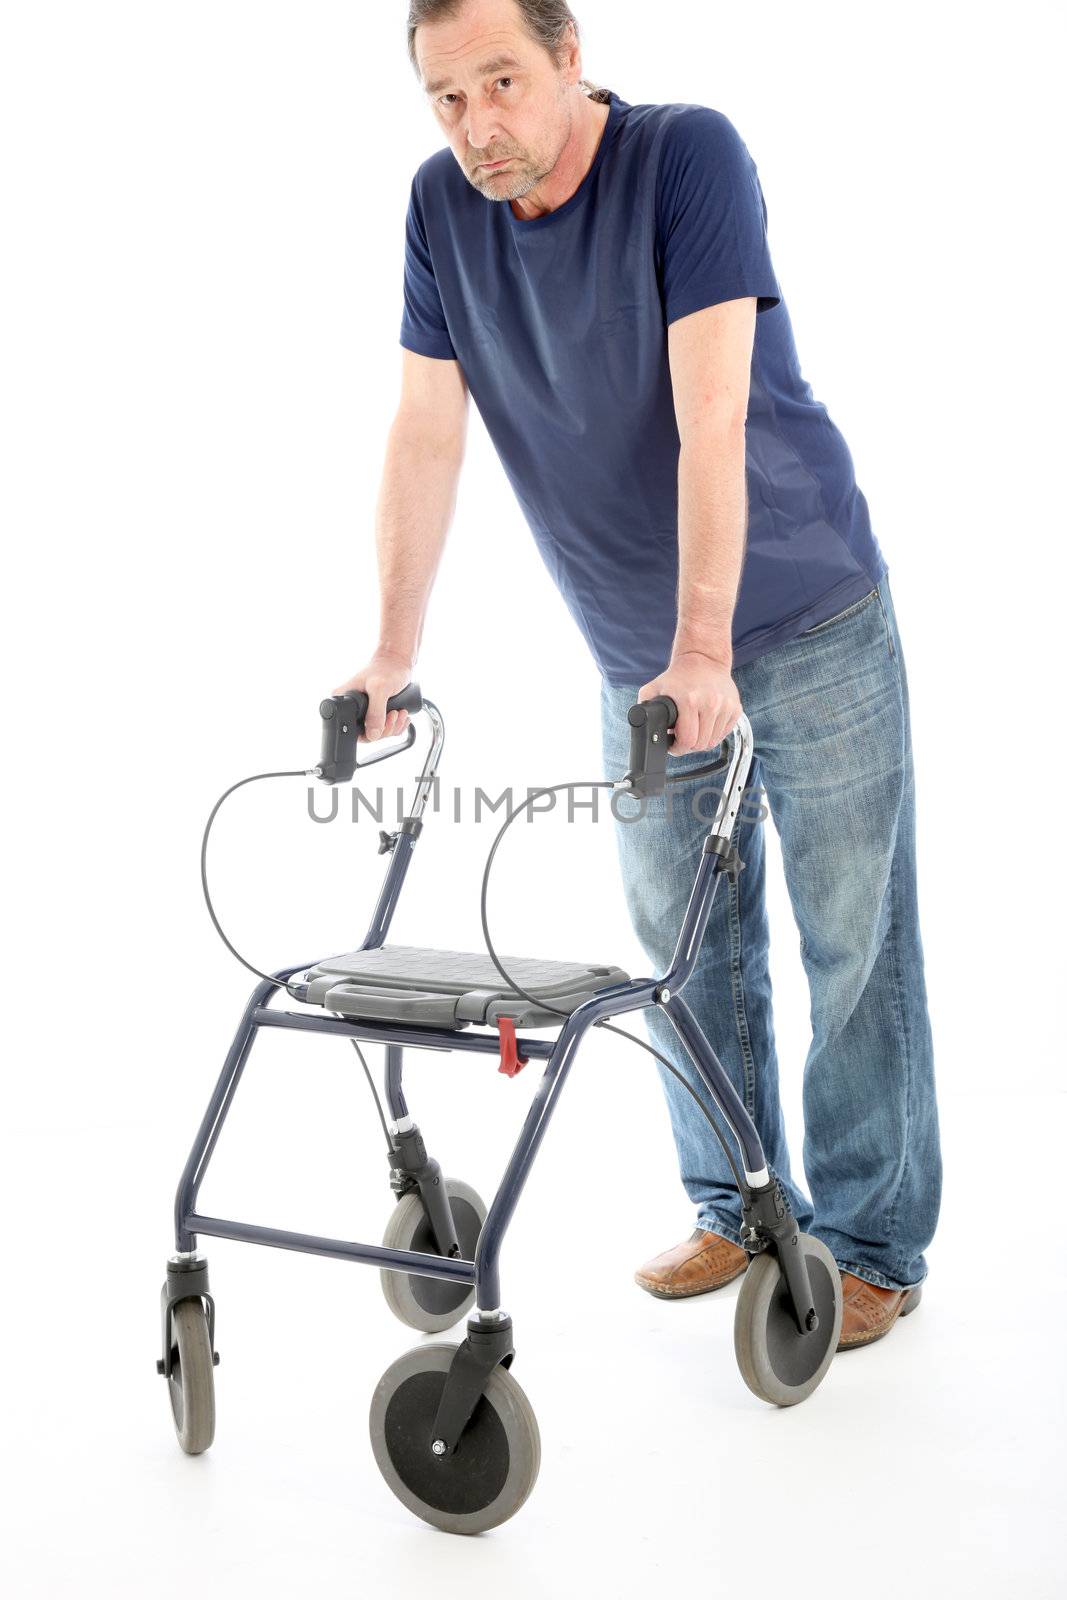 Despondent man facing the camera leaning heavily on a medical walker for support isolated on white Depressed man facing the camera leaning heavily on a medical walker for support isolated on white 